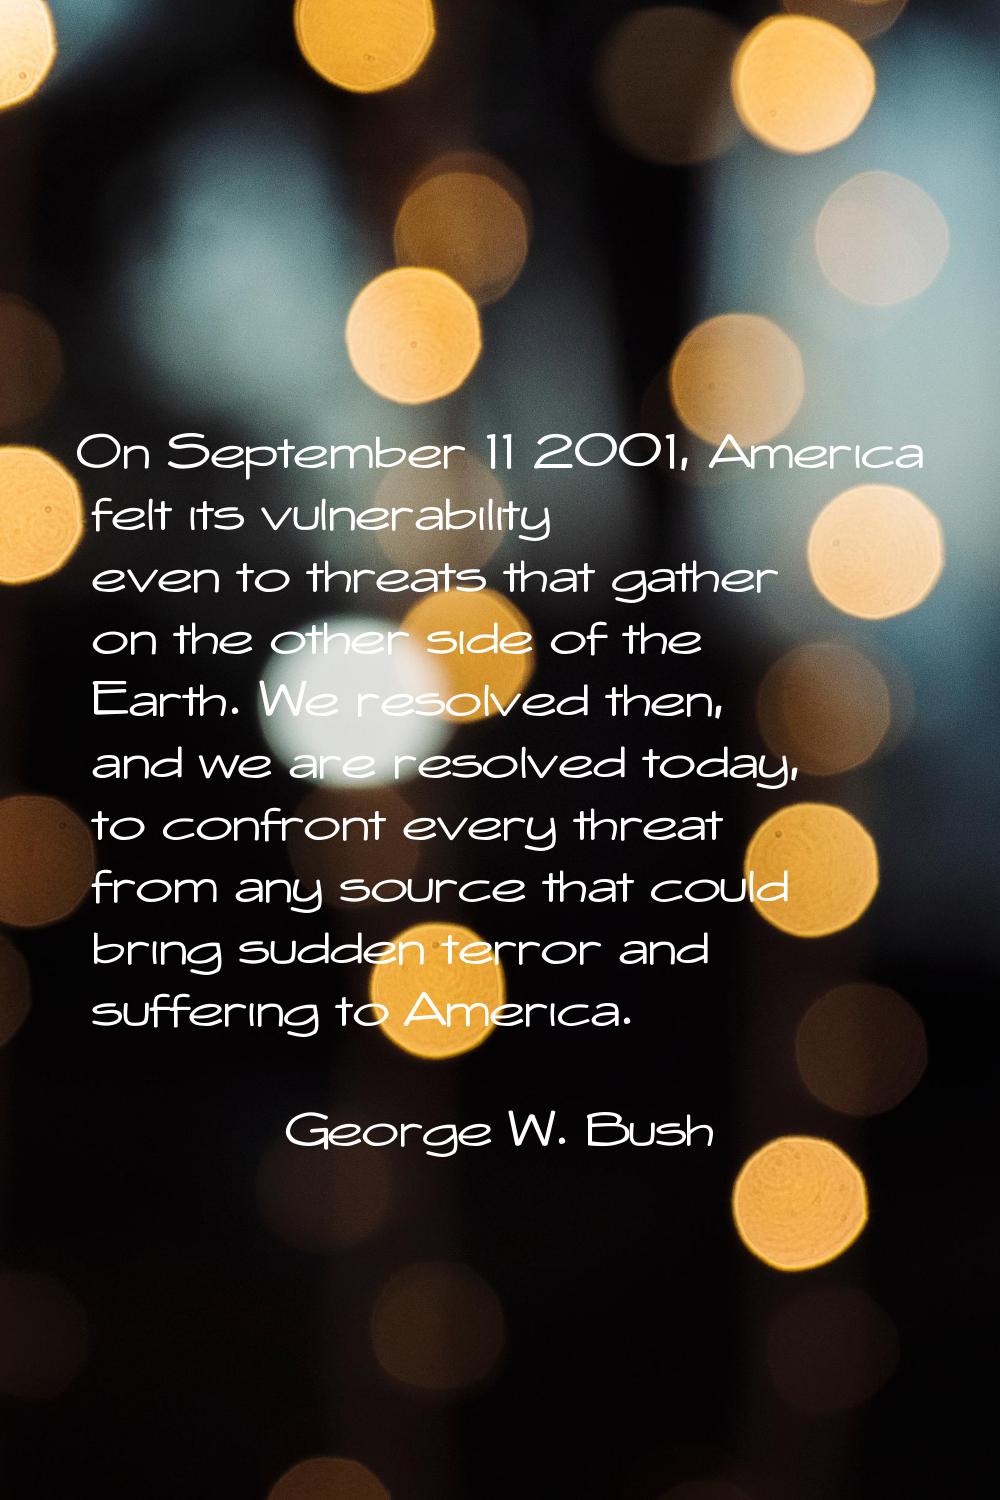 On September 11 2001, America felt its vulnerability even to threats that gather on the other side 